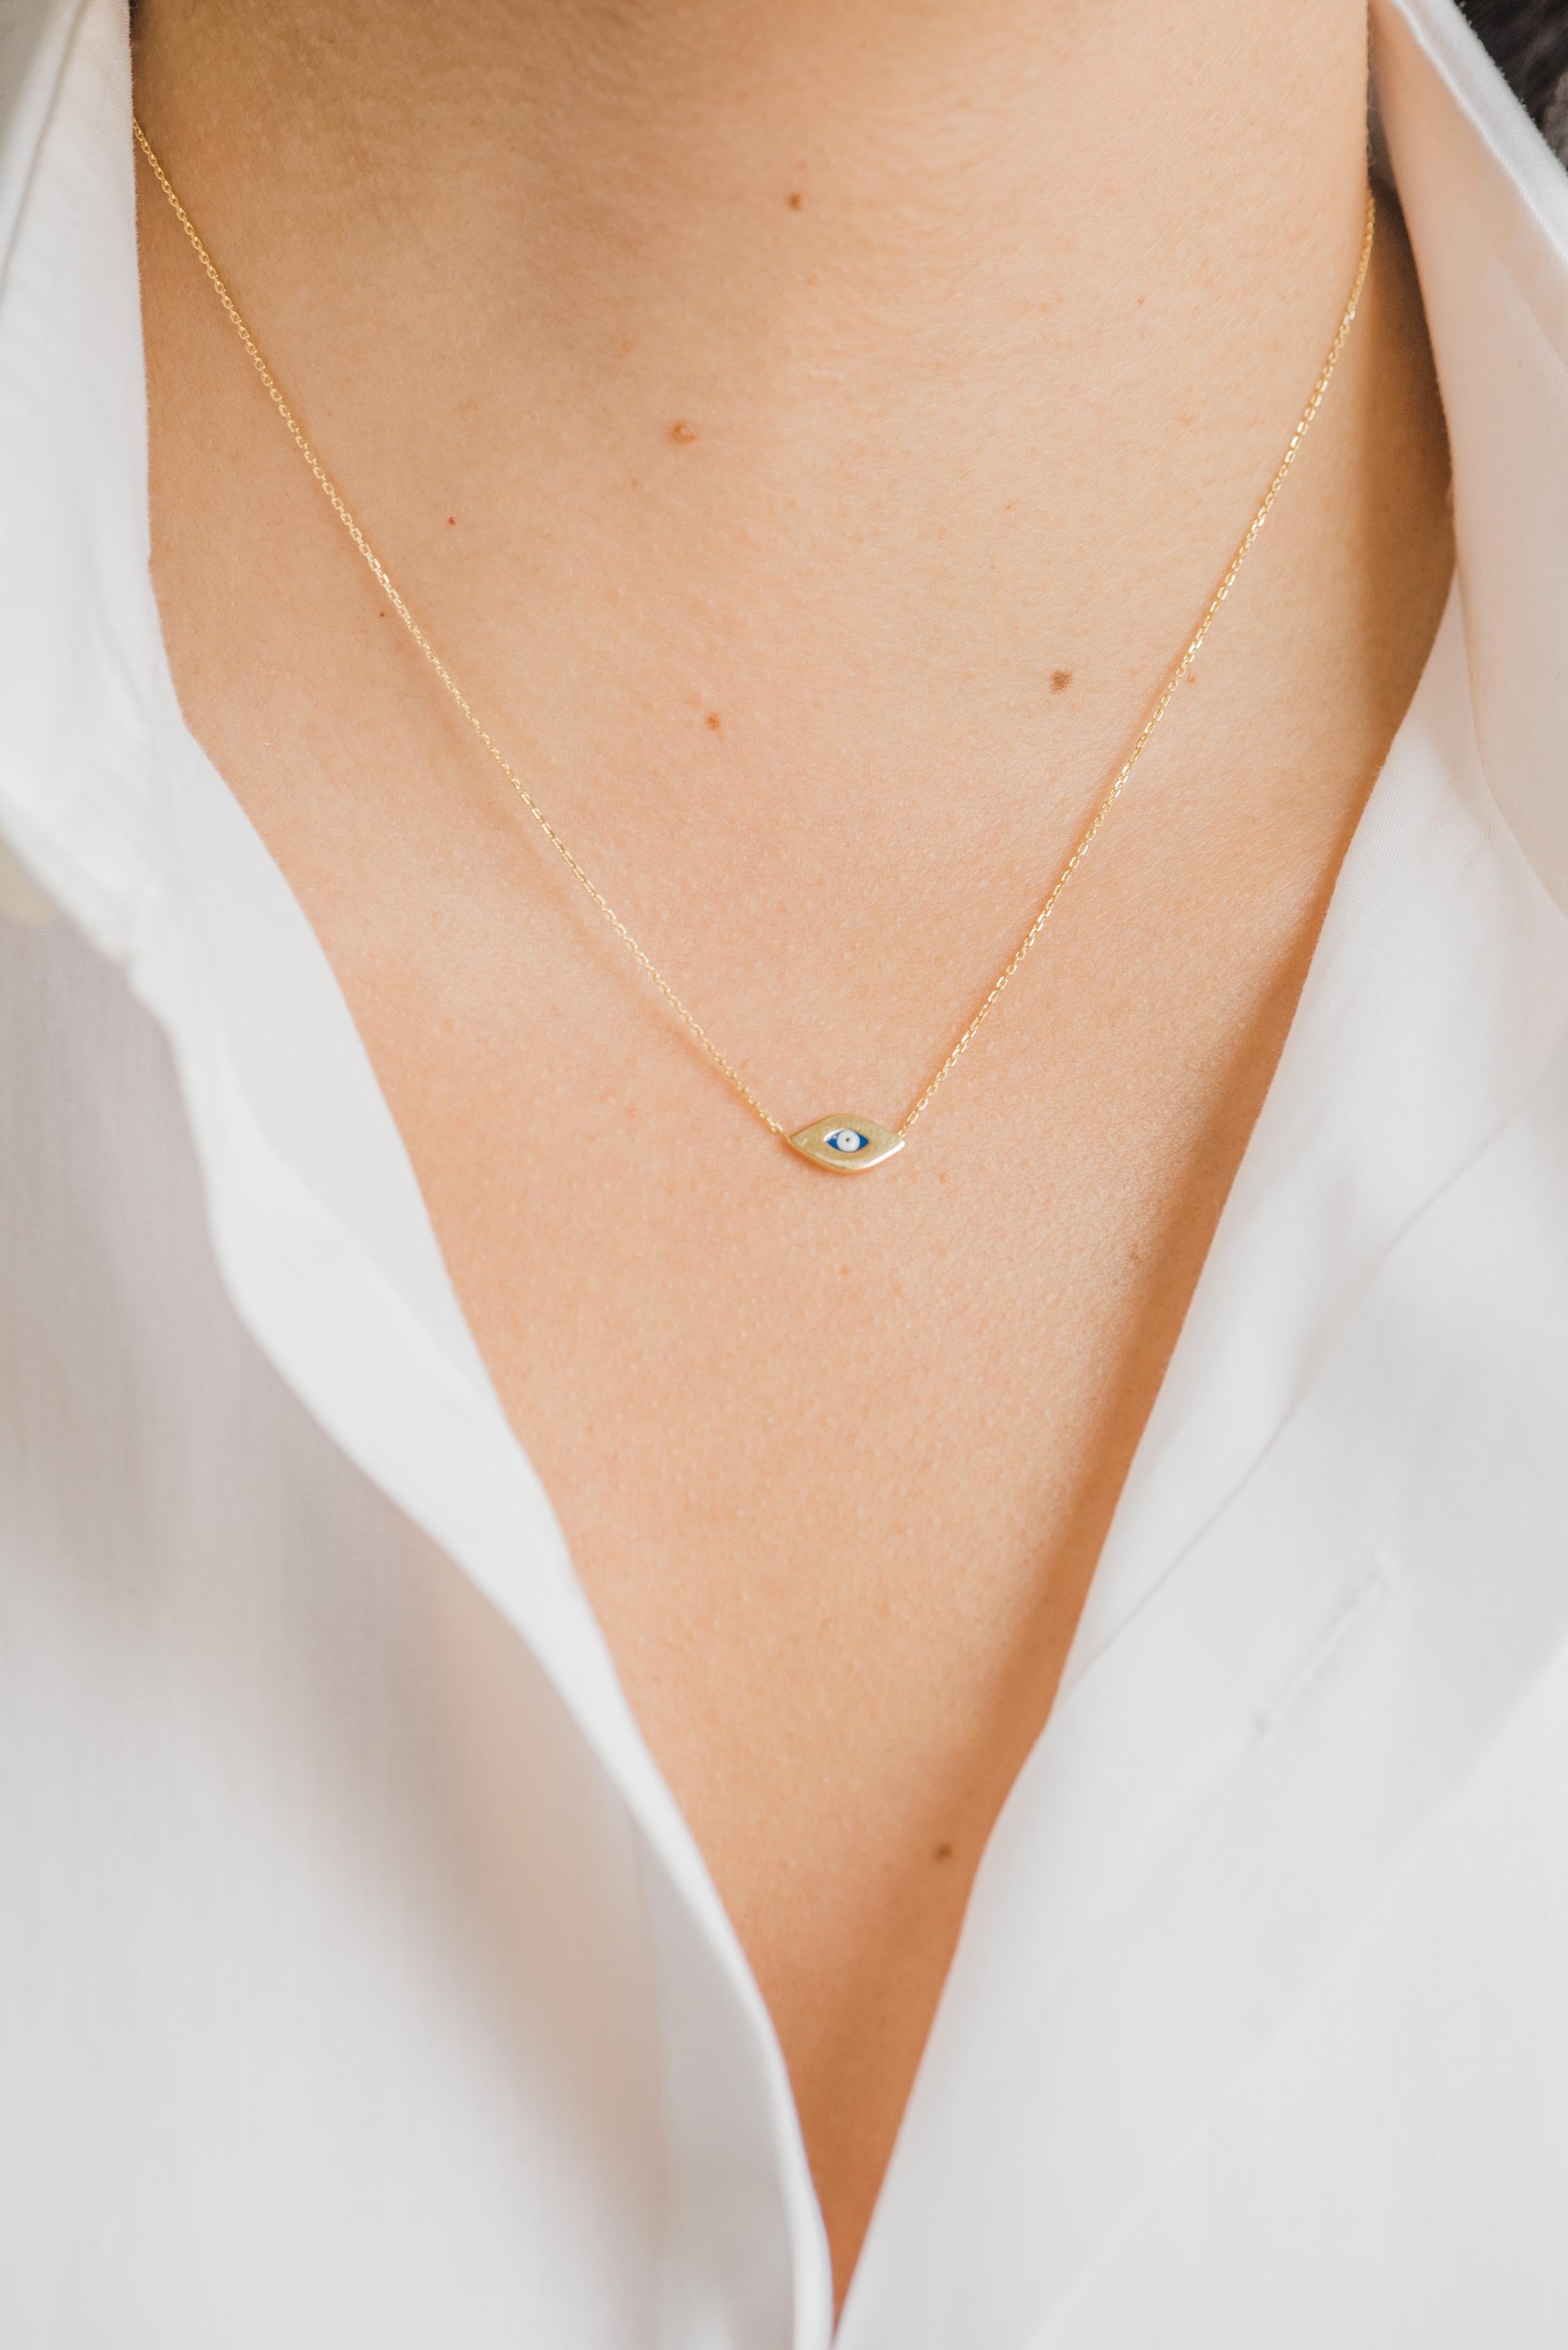 14k solid gold dainty evil eye charm hanging form an adjustable 16'' to 18'' cable link chain necklace,in 14k yellow gold. Lays beautifully by itself or layered, wear it up or down, day and night, this necklace will be your new obsession!

Size of